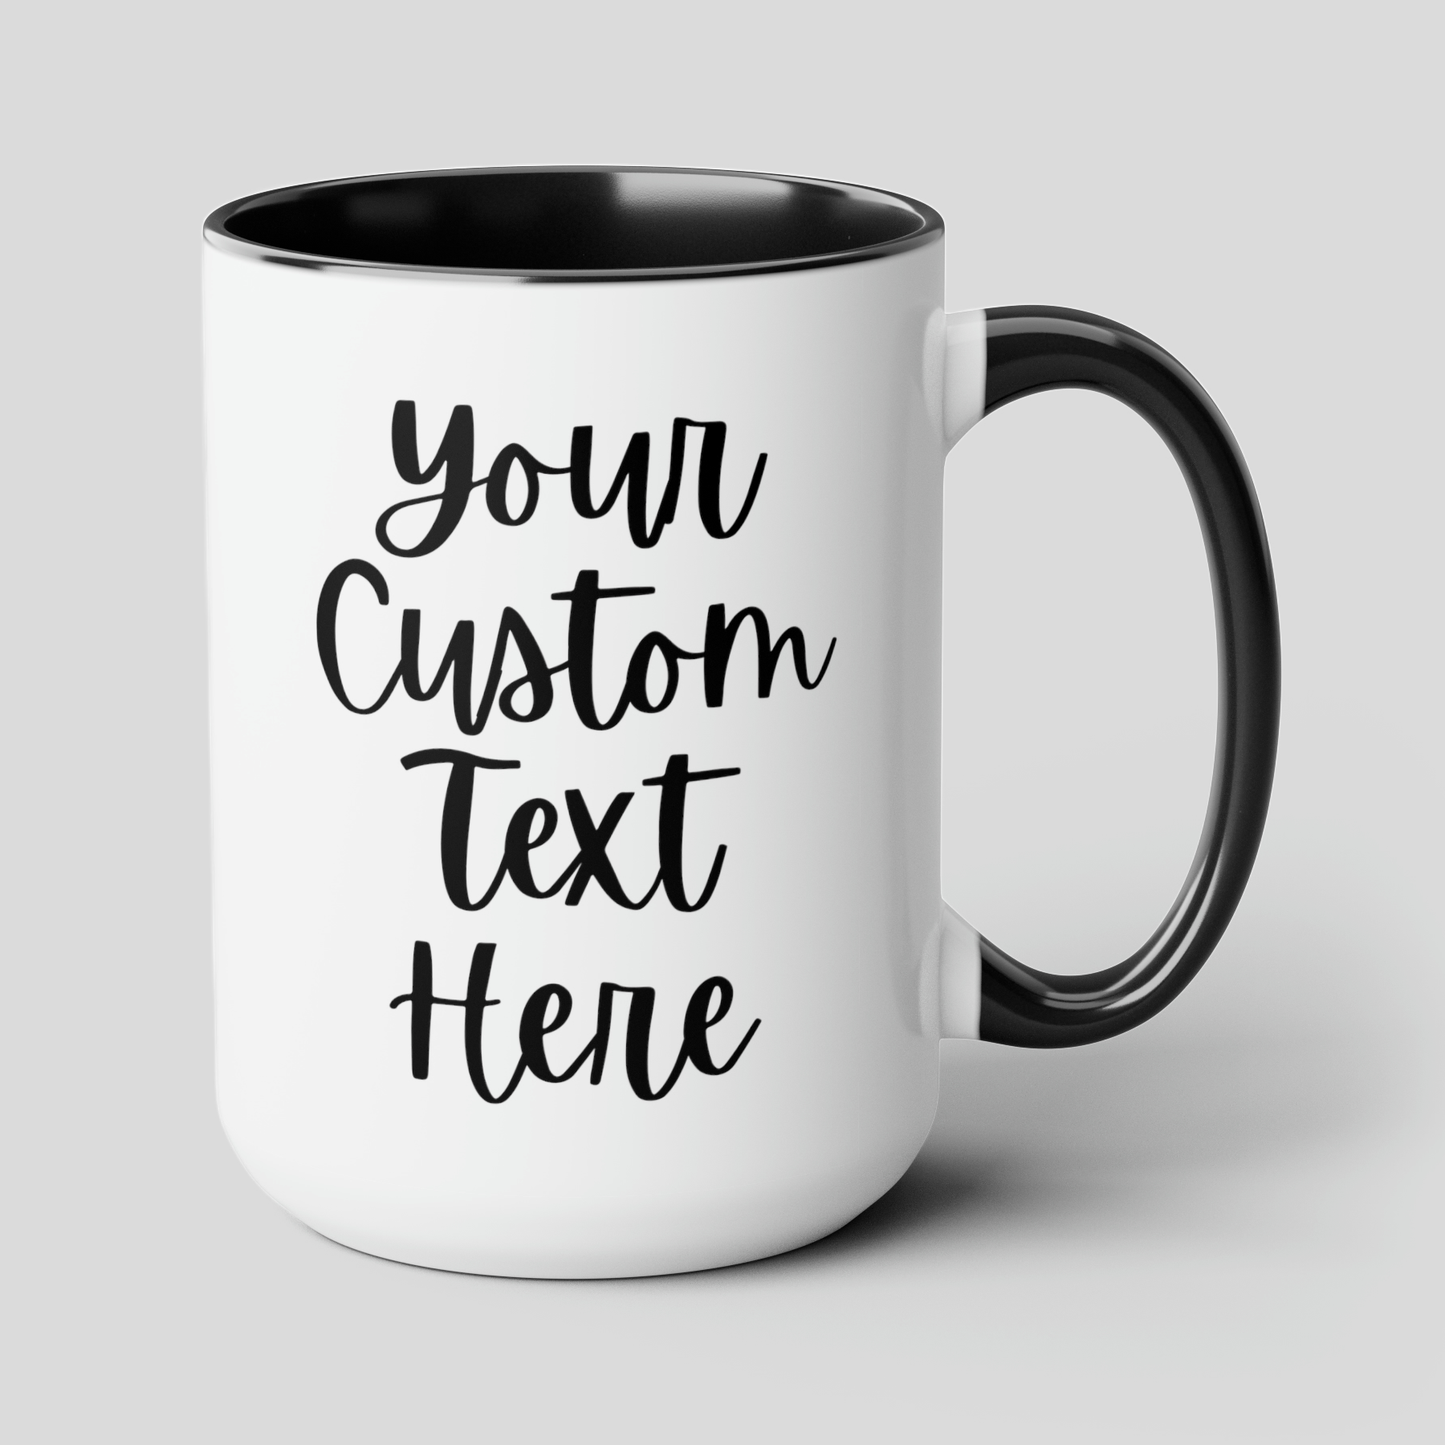 Customized Add Text 15oz white with black accent funny large coffee mug gift for friend family create your own custom personalize waveywares wavey wares wavywares wavy wares cover